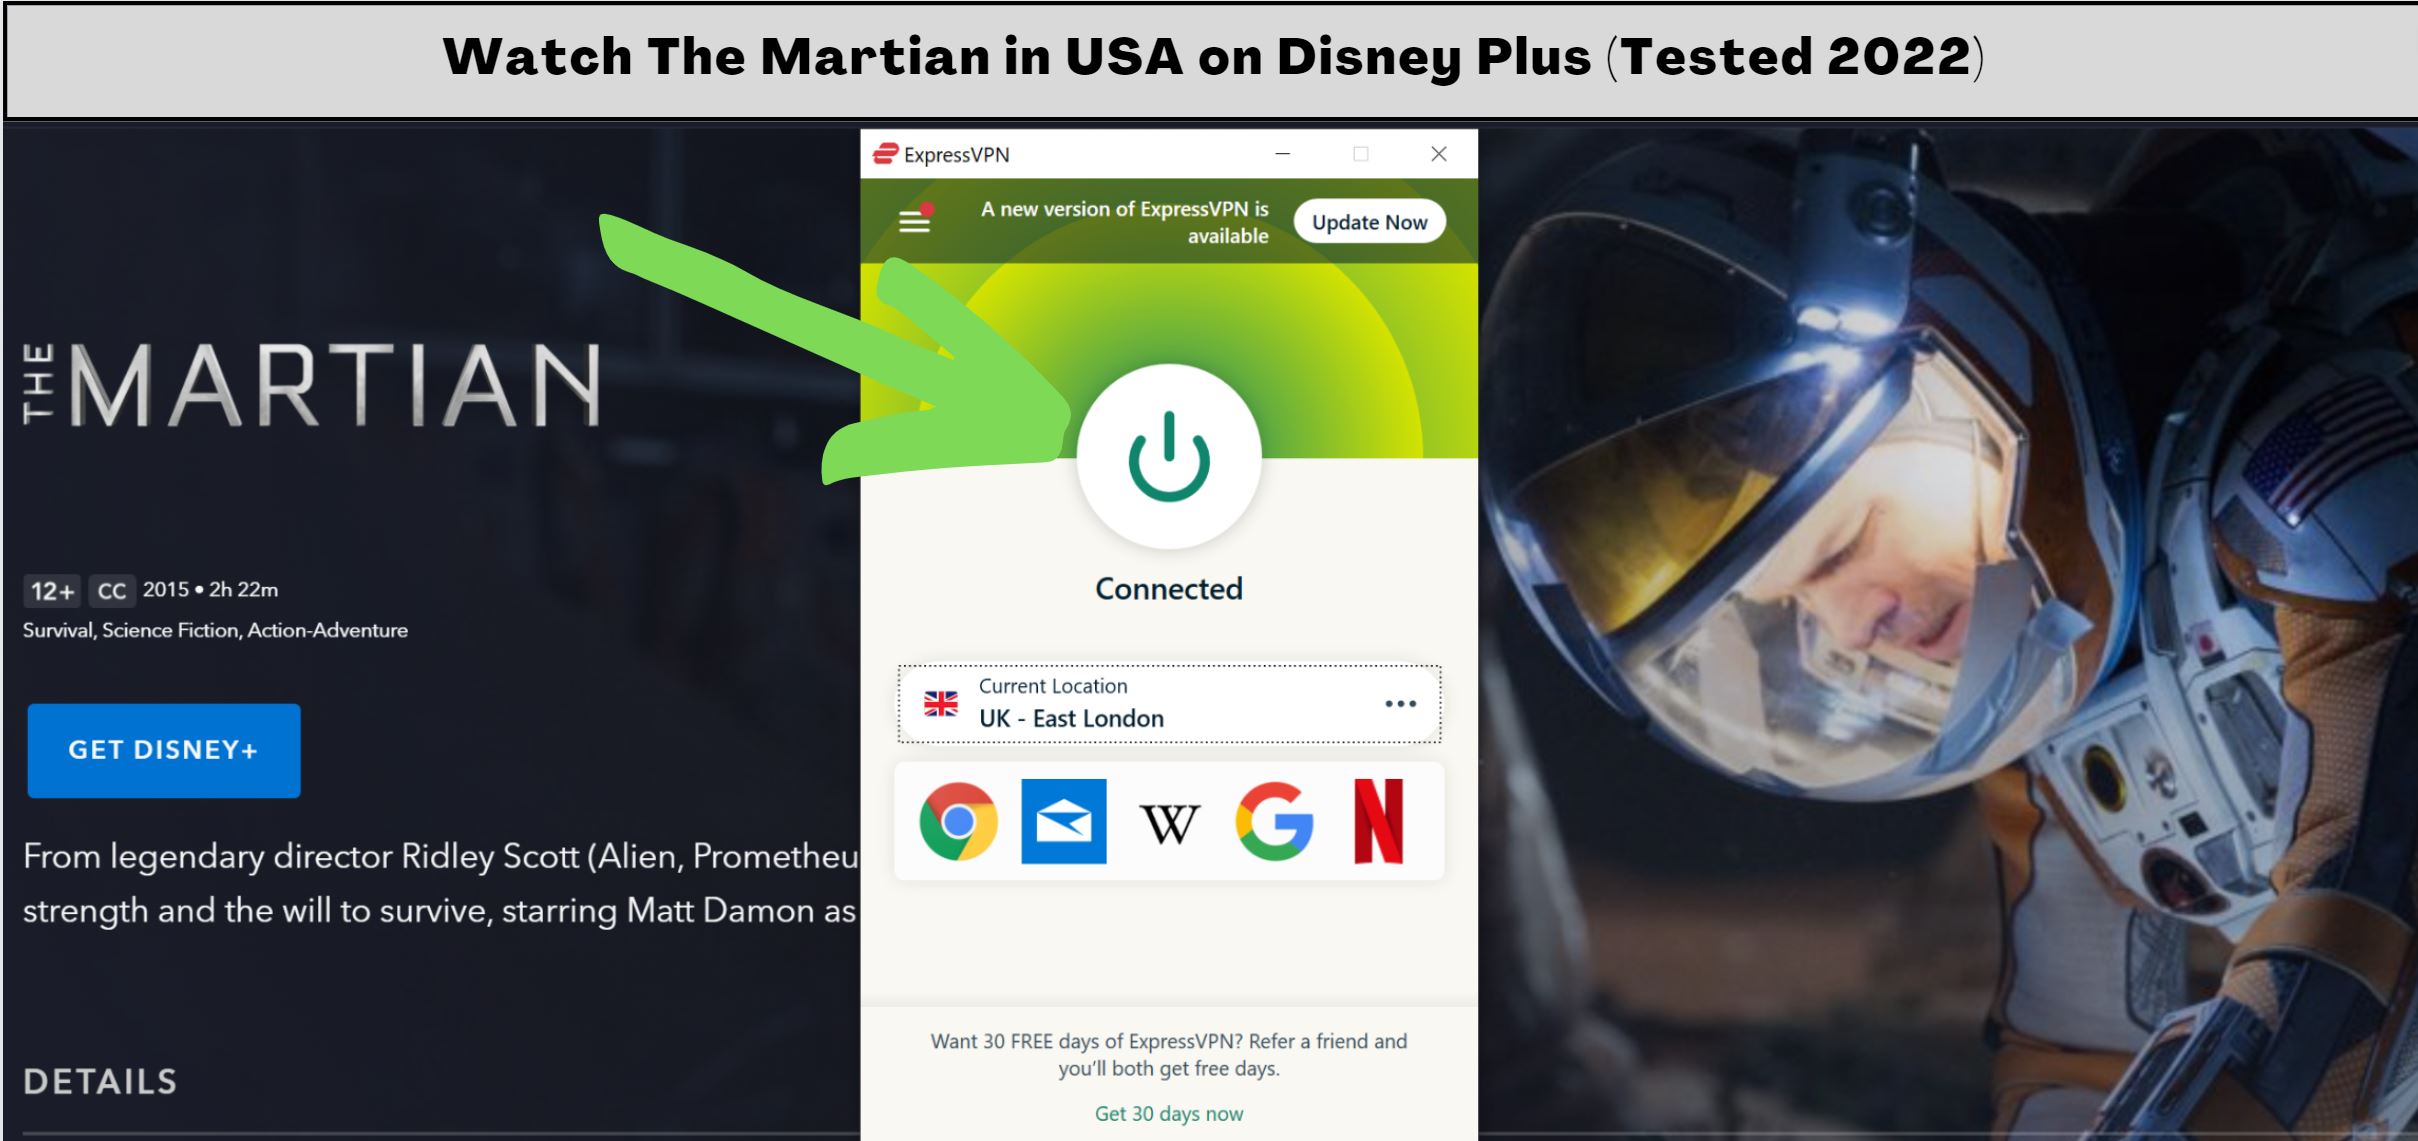 Where to watch The Martian in USA